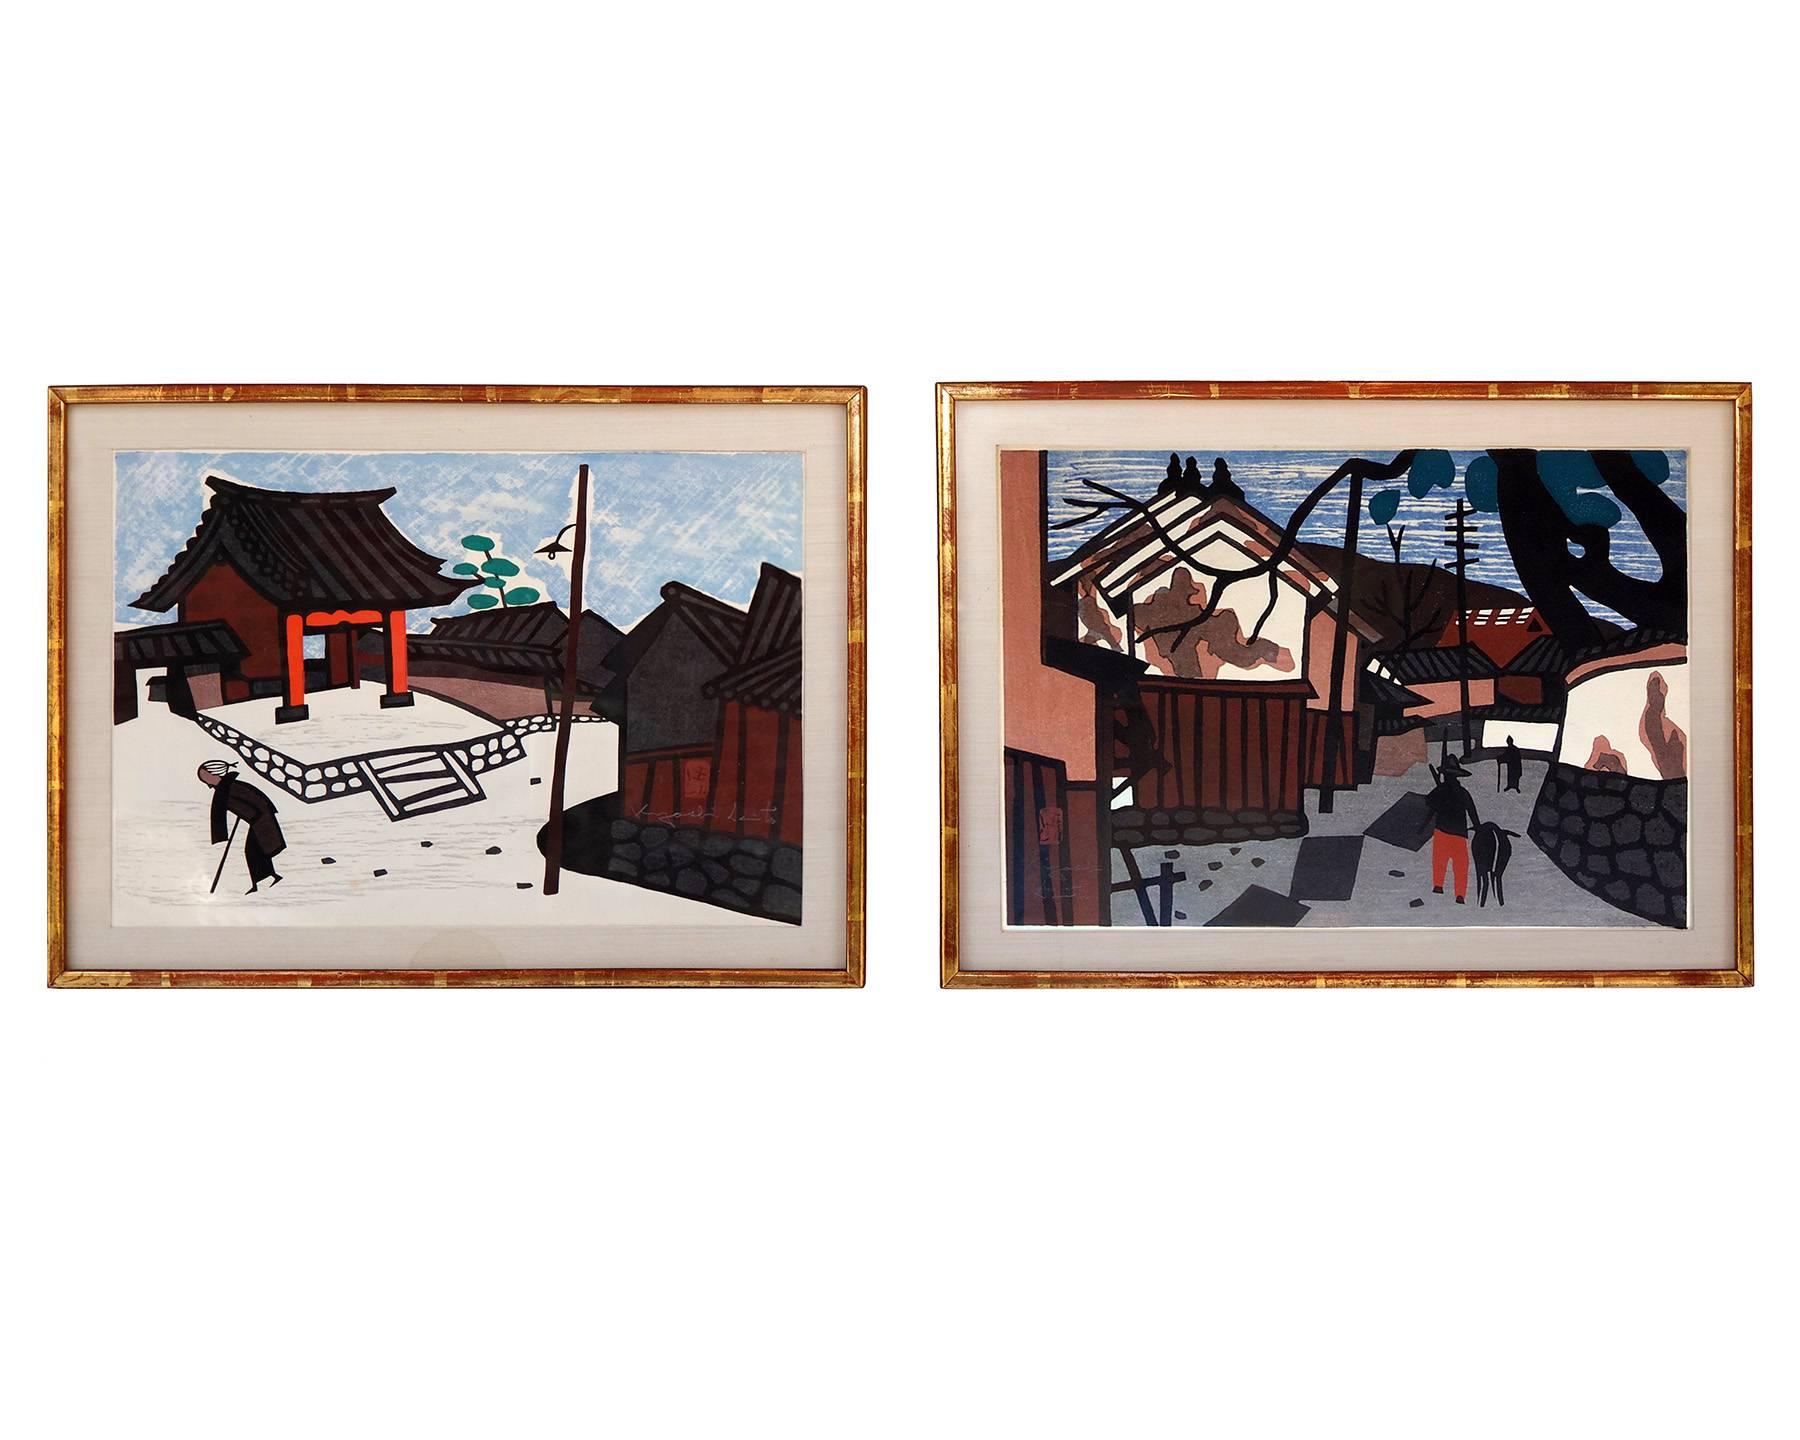 This charming pair of wood block prints by Kiyoshi Saito (1907-1992) presents very well and is beautifully framed. Signed in pencil on the front. Marked Sindin-Harris Galleries in Hartsdale, NY, circa 1950s.

Framed Size: 18 x 13.25 inches.